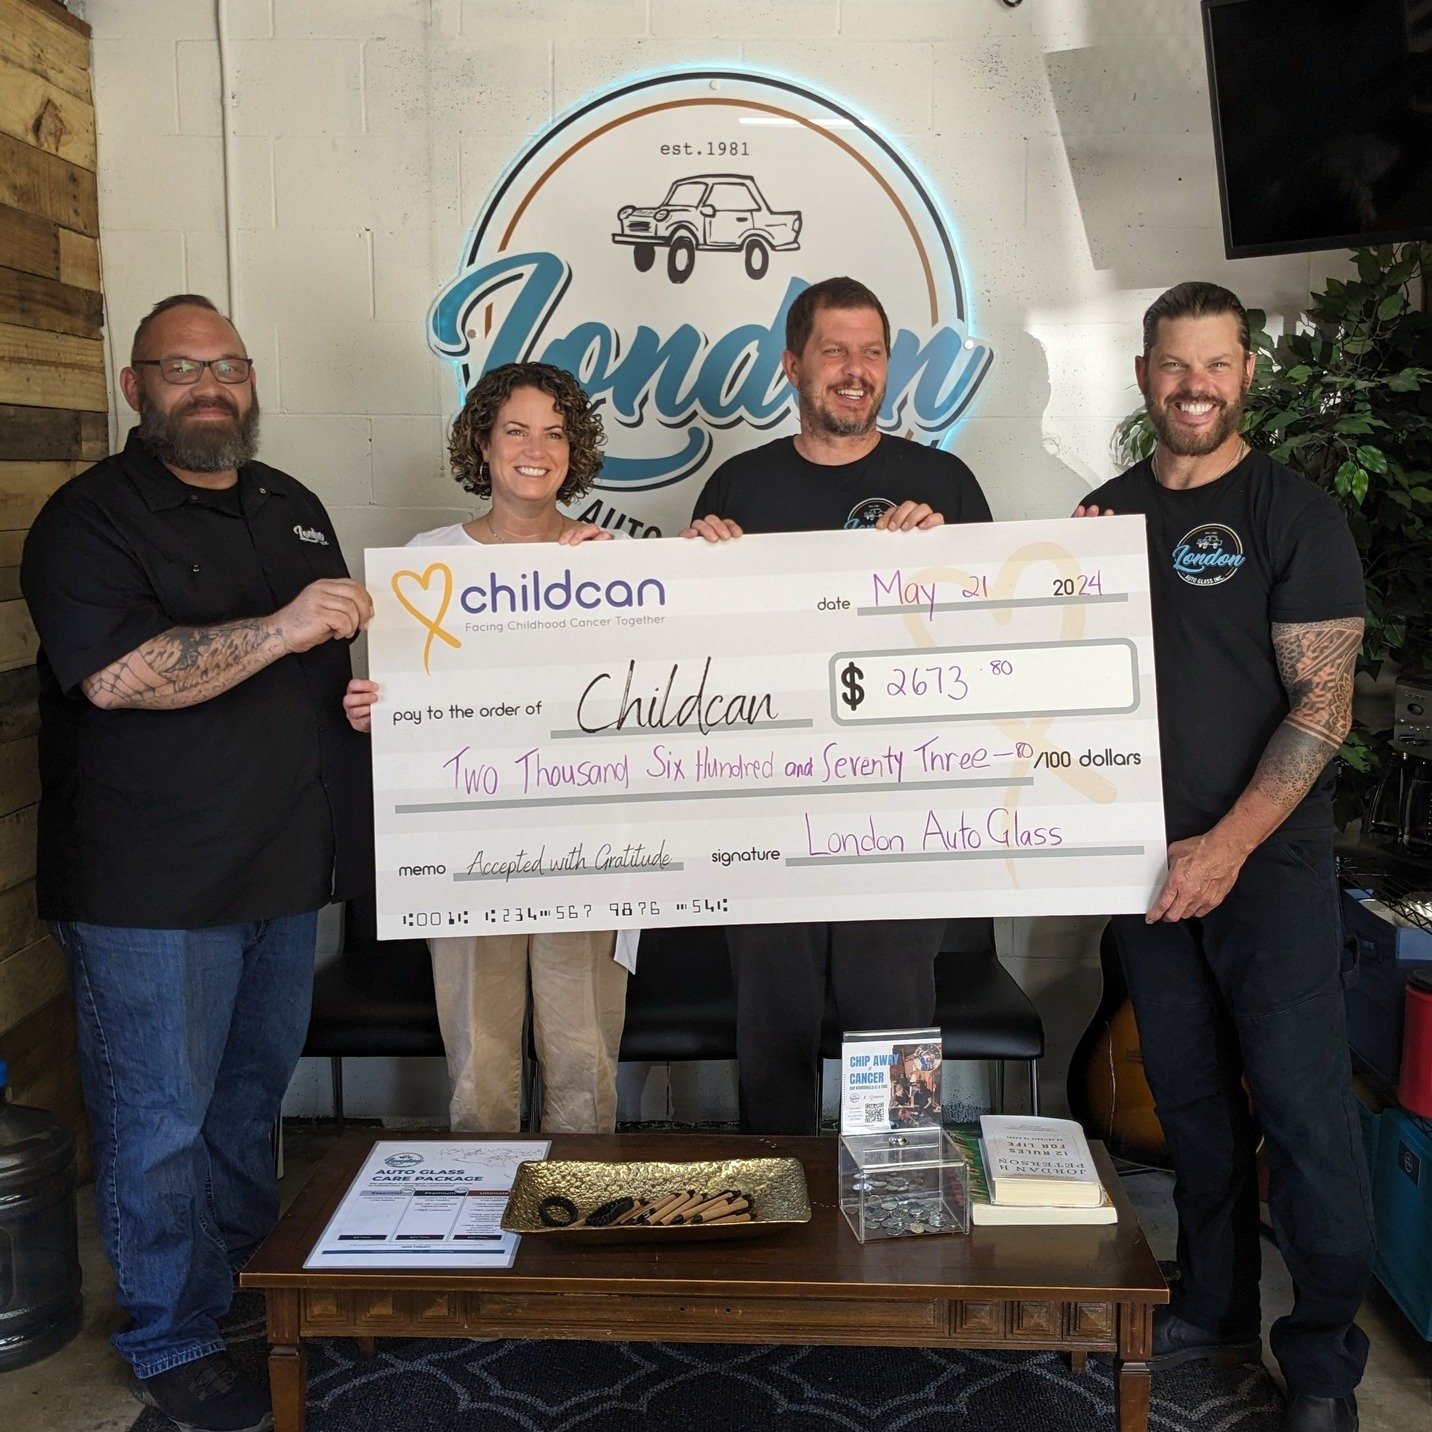 So grateful to London Auto Glass, Mokka (the sweetest puppy), @edsfries, and everyone who came out to support Chip Away at Cancer, for the funds which we received yesterday.  London Auto Glass hinted of more to come! We are #FacingChildhoodCancerToge